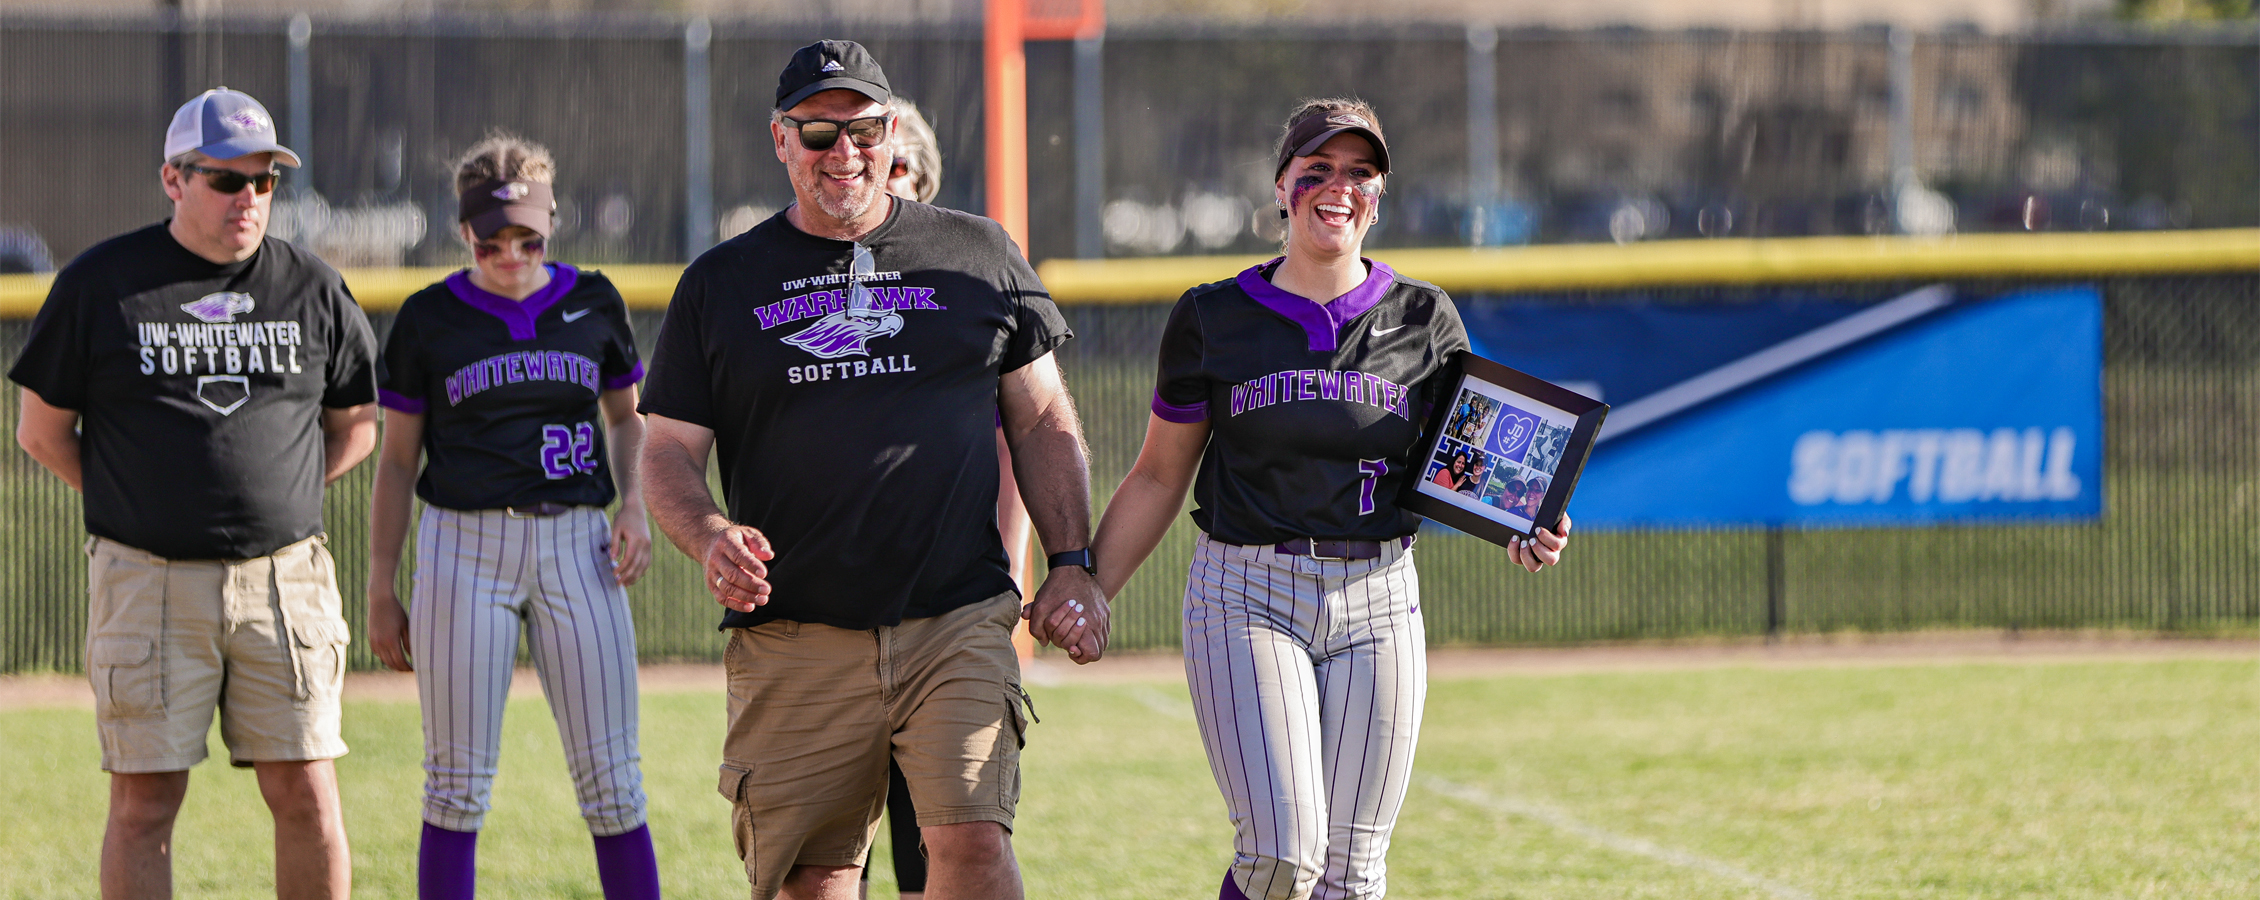 A Warhawk softball player walks hand in hand with her dad on the softball field while smiling and holding a plaque.